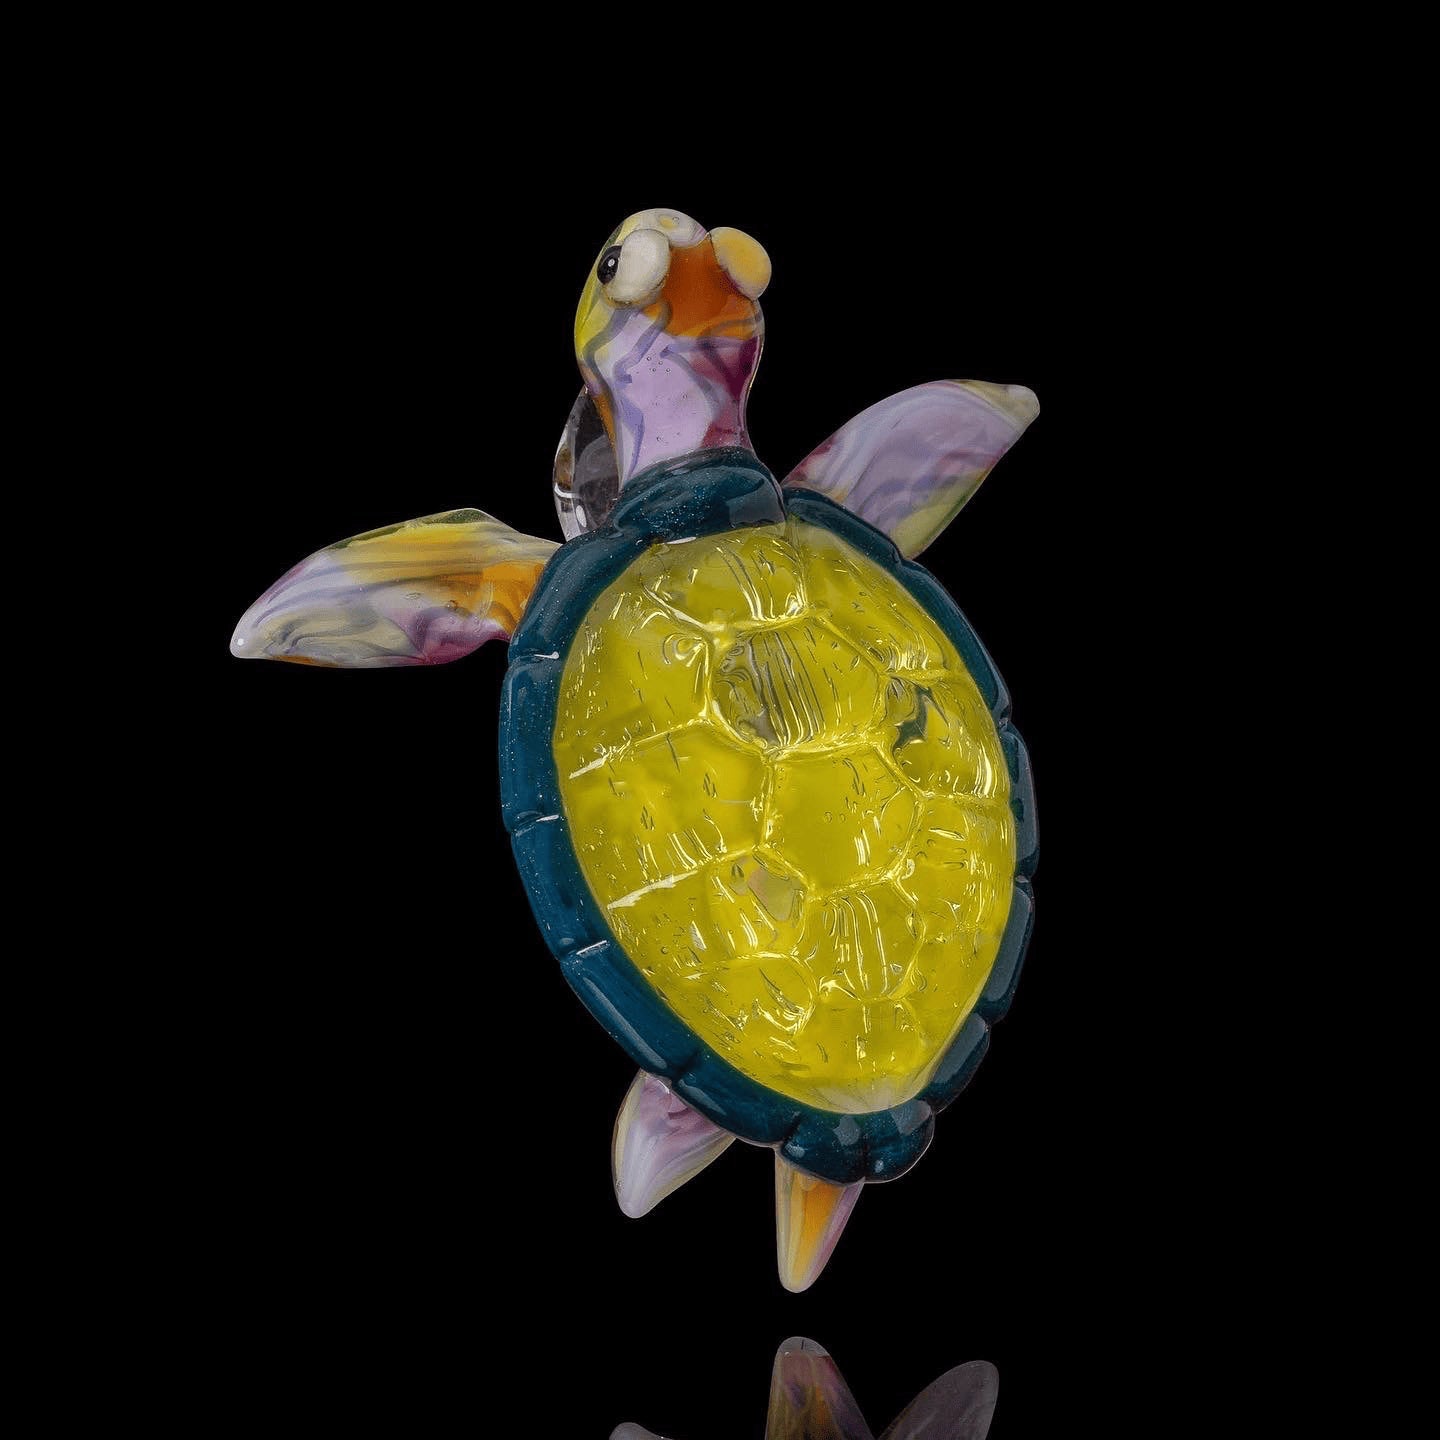 luxurious design of the Collab Turtle Rig Set with Pendant and Cap by Turtle Glass x Scomo Moanet (Scribble Season 2022)